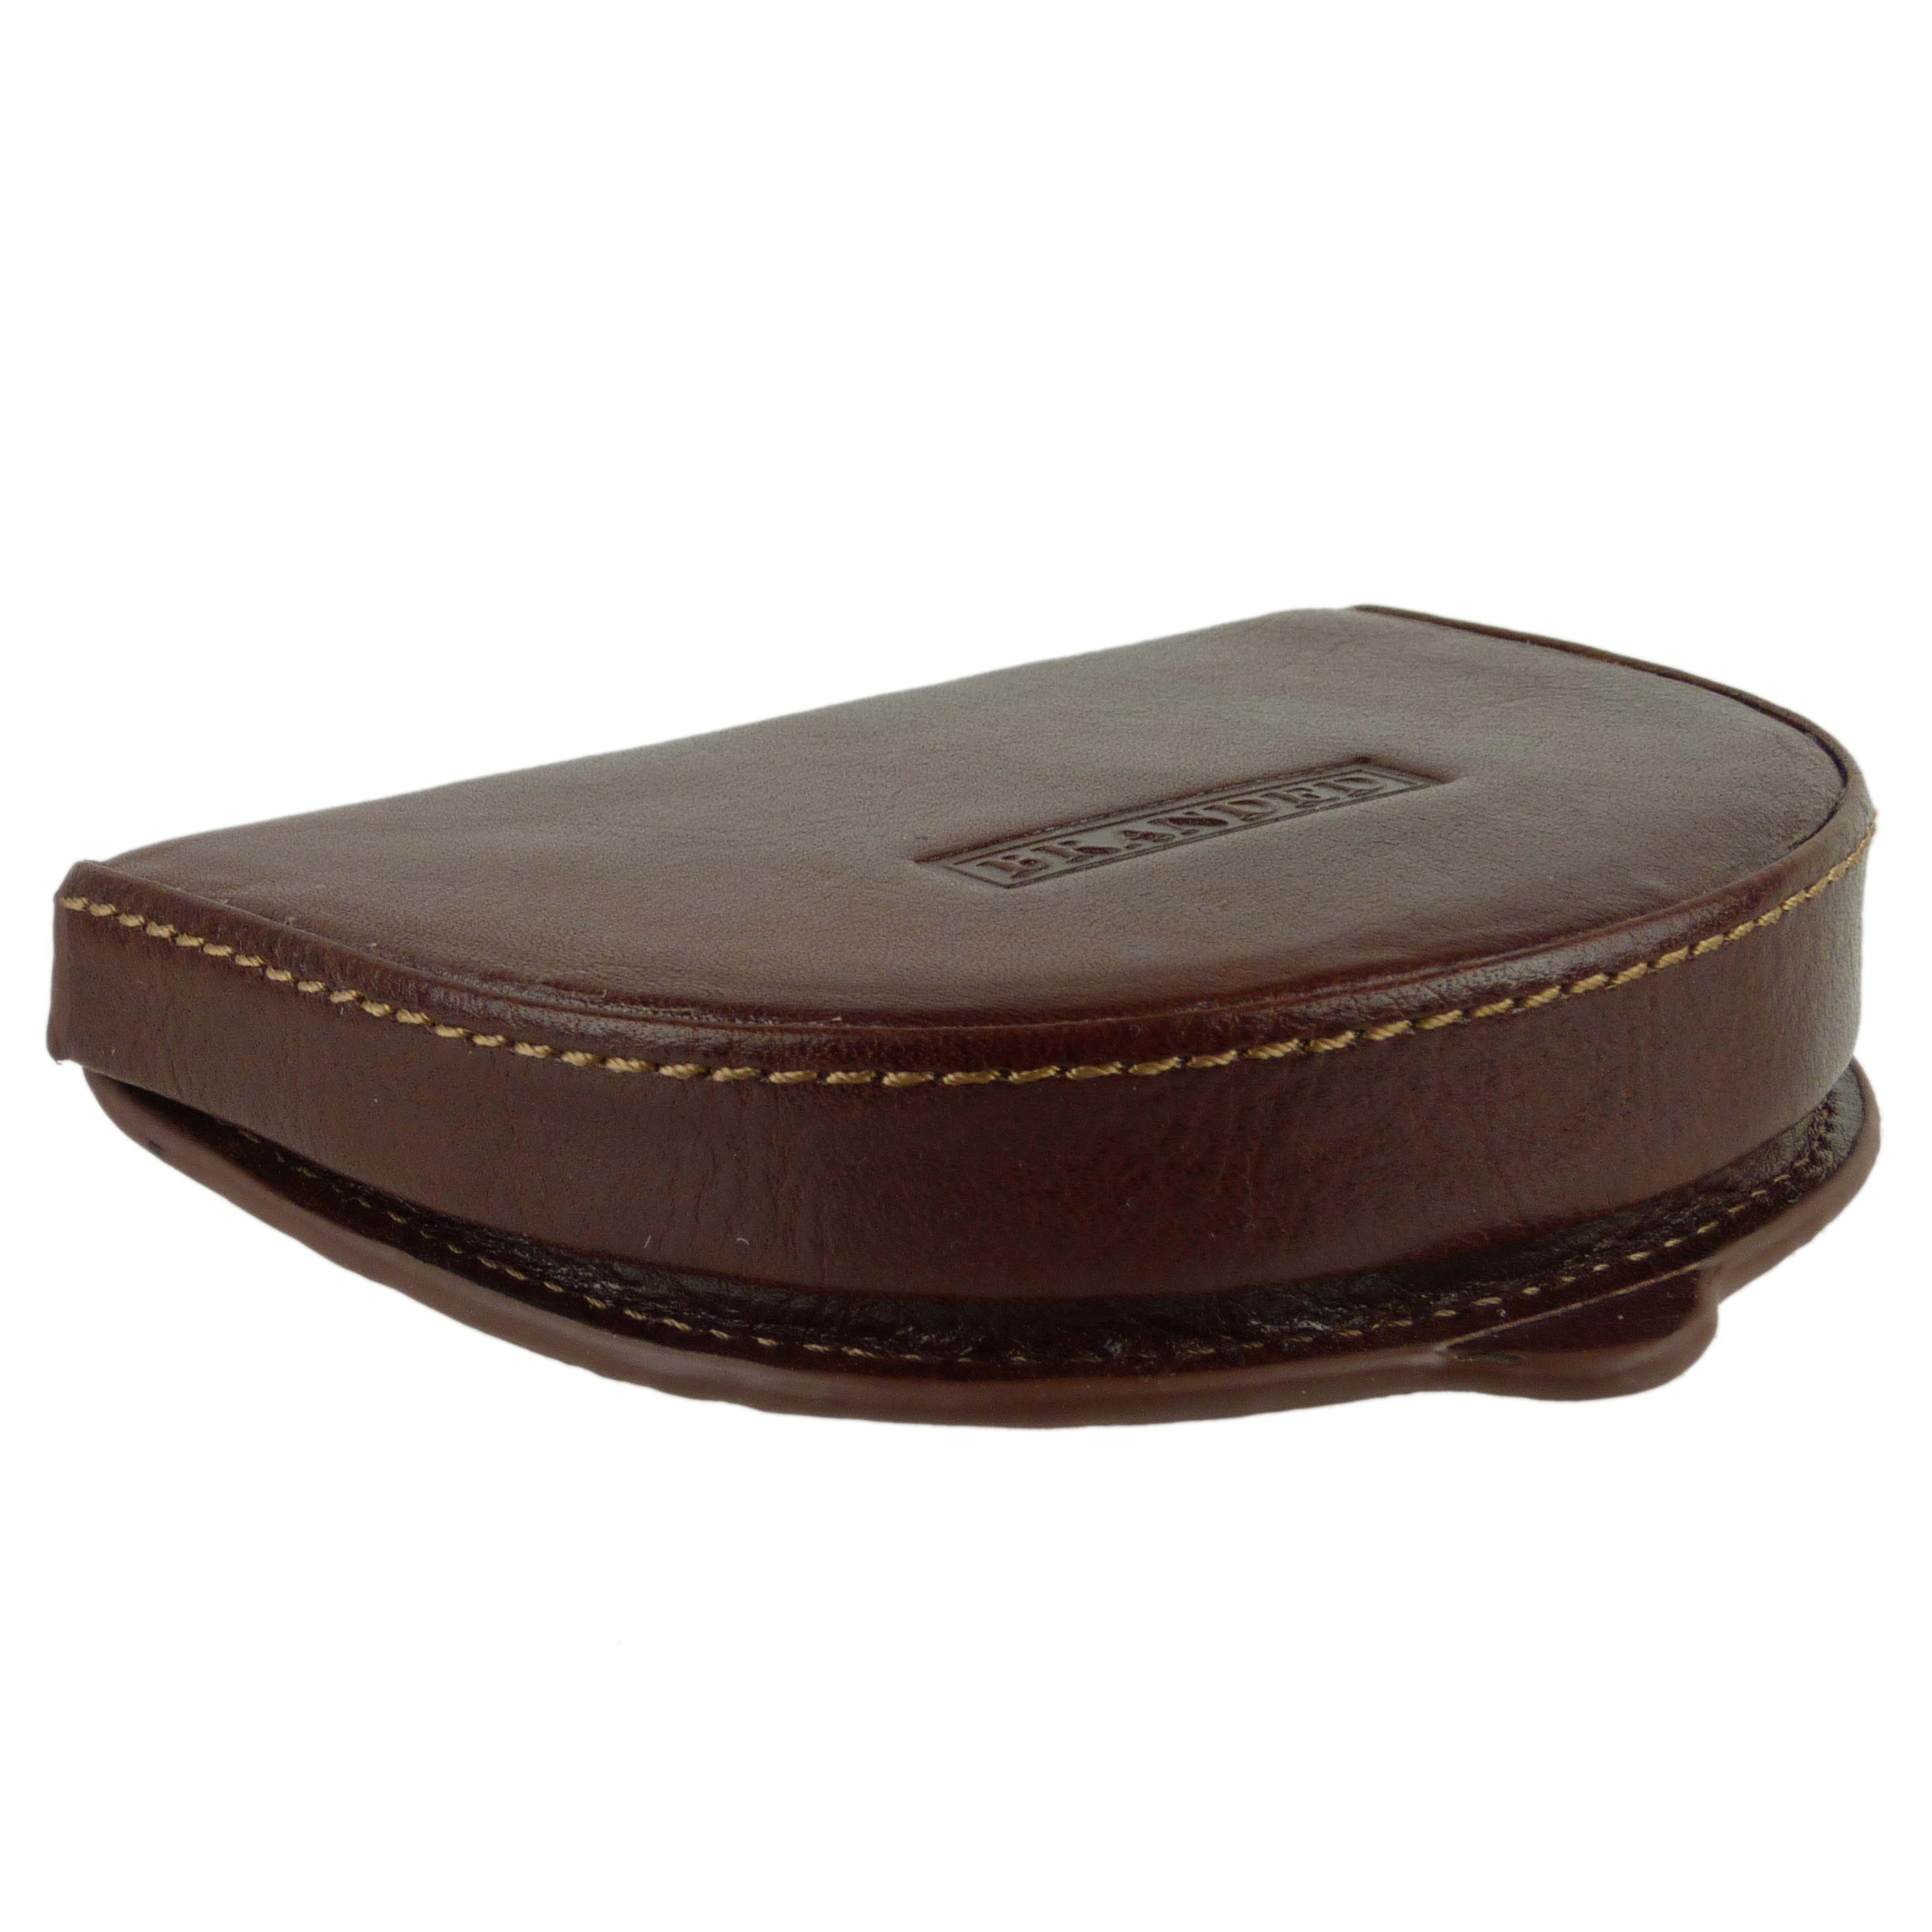 NEW Mens Gents Top Quality LEATHER Coin Tray by Golunski Purse Wallet 2 colours 